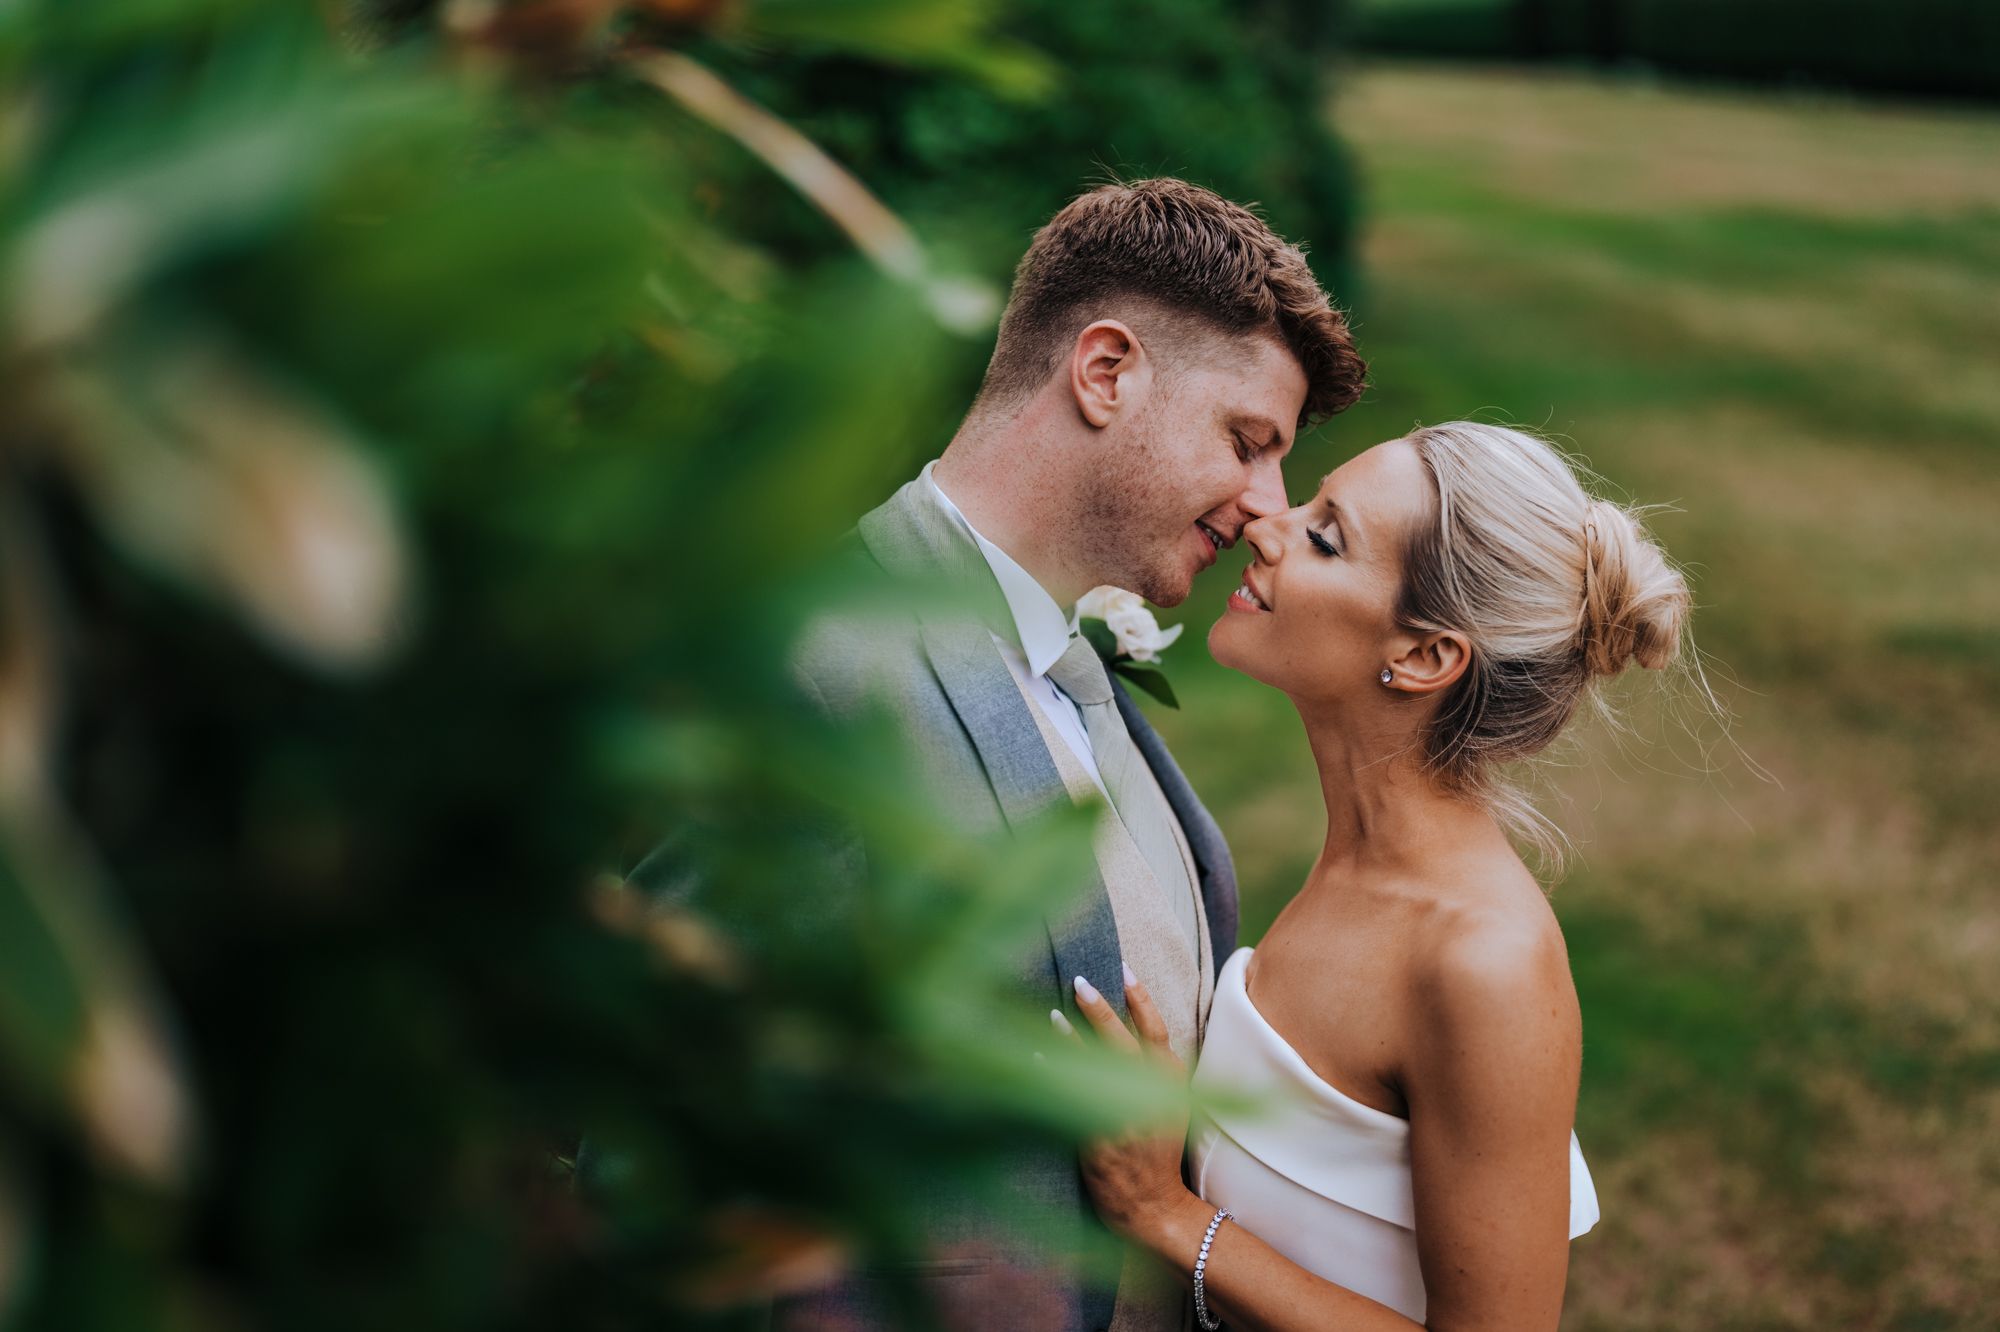 sussex wedding photographer pricing and packages